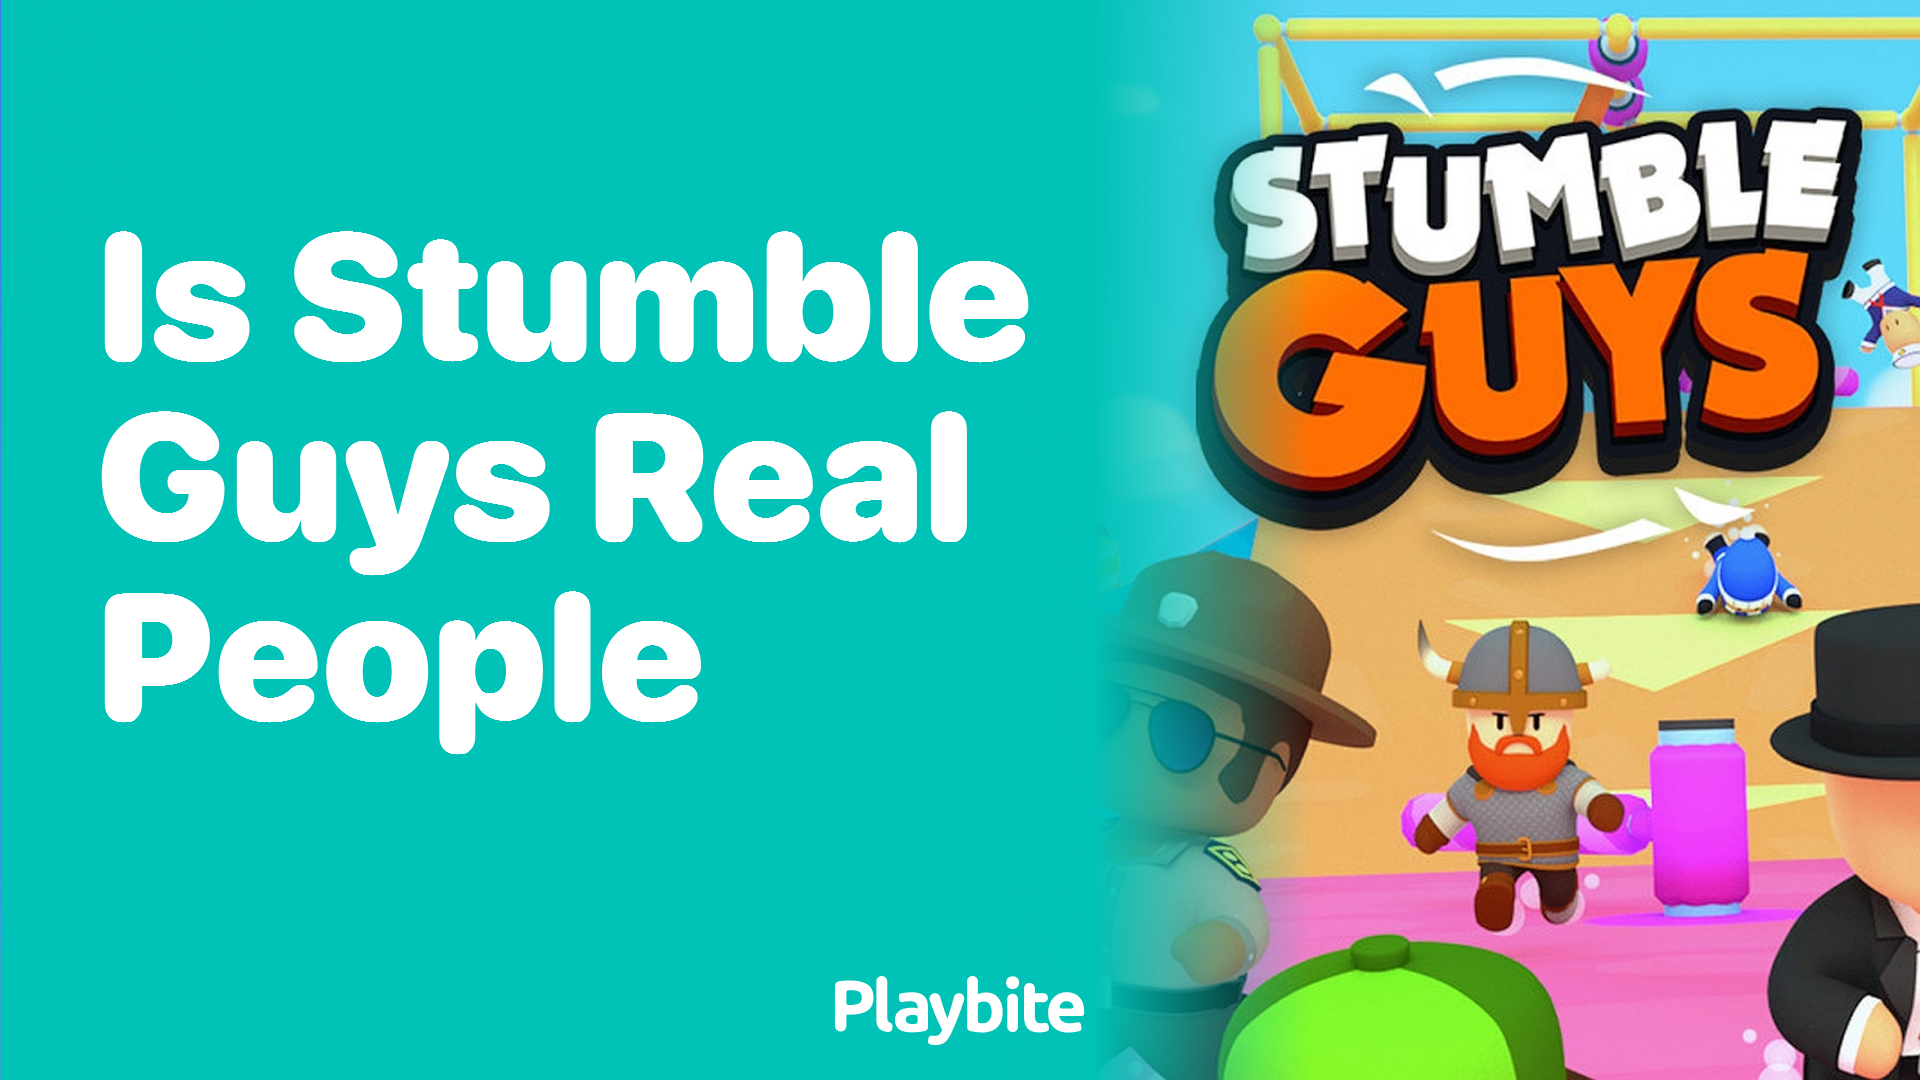 Is Stumble Guys Played With Real People?